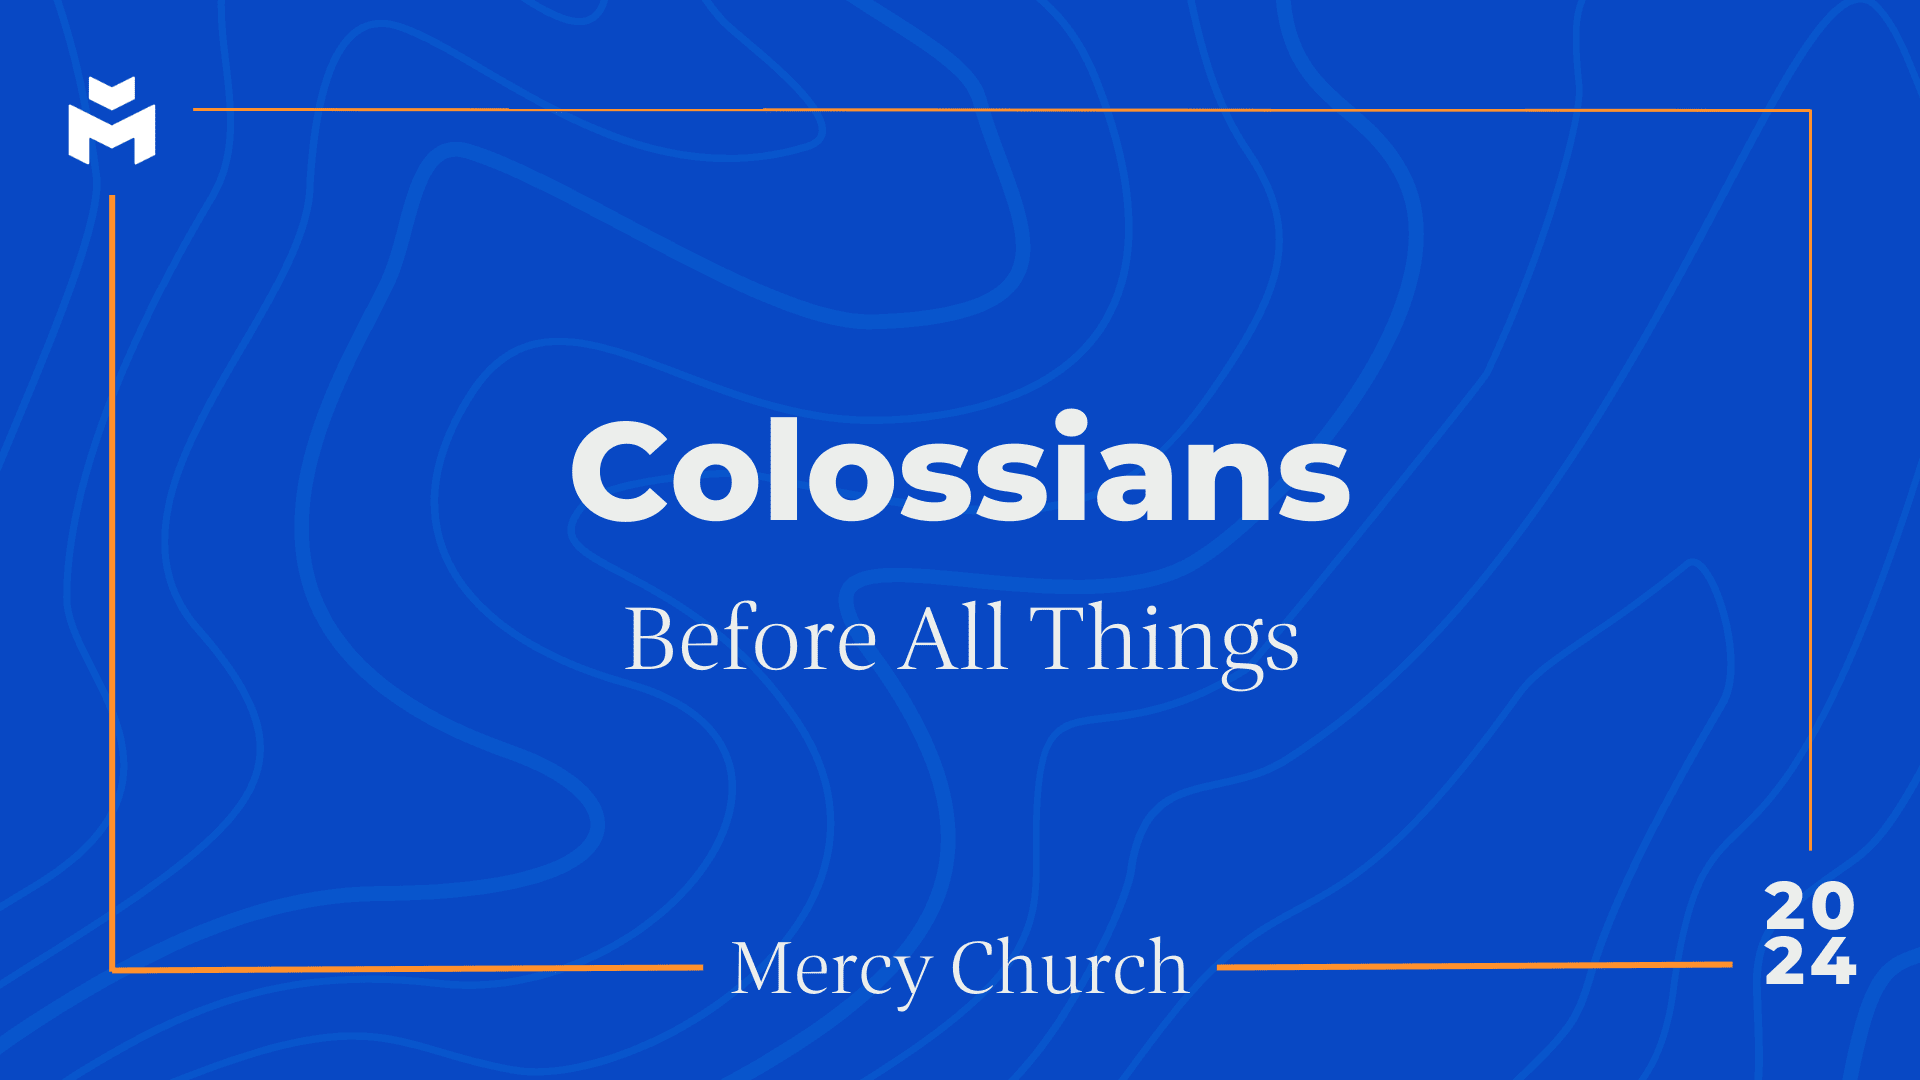 Colossians: Before All Things